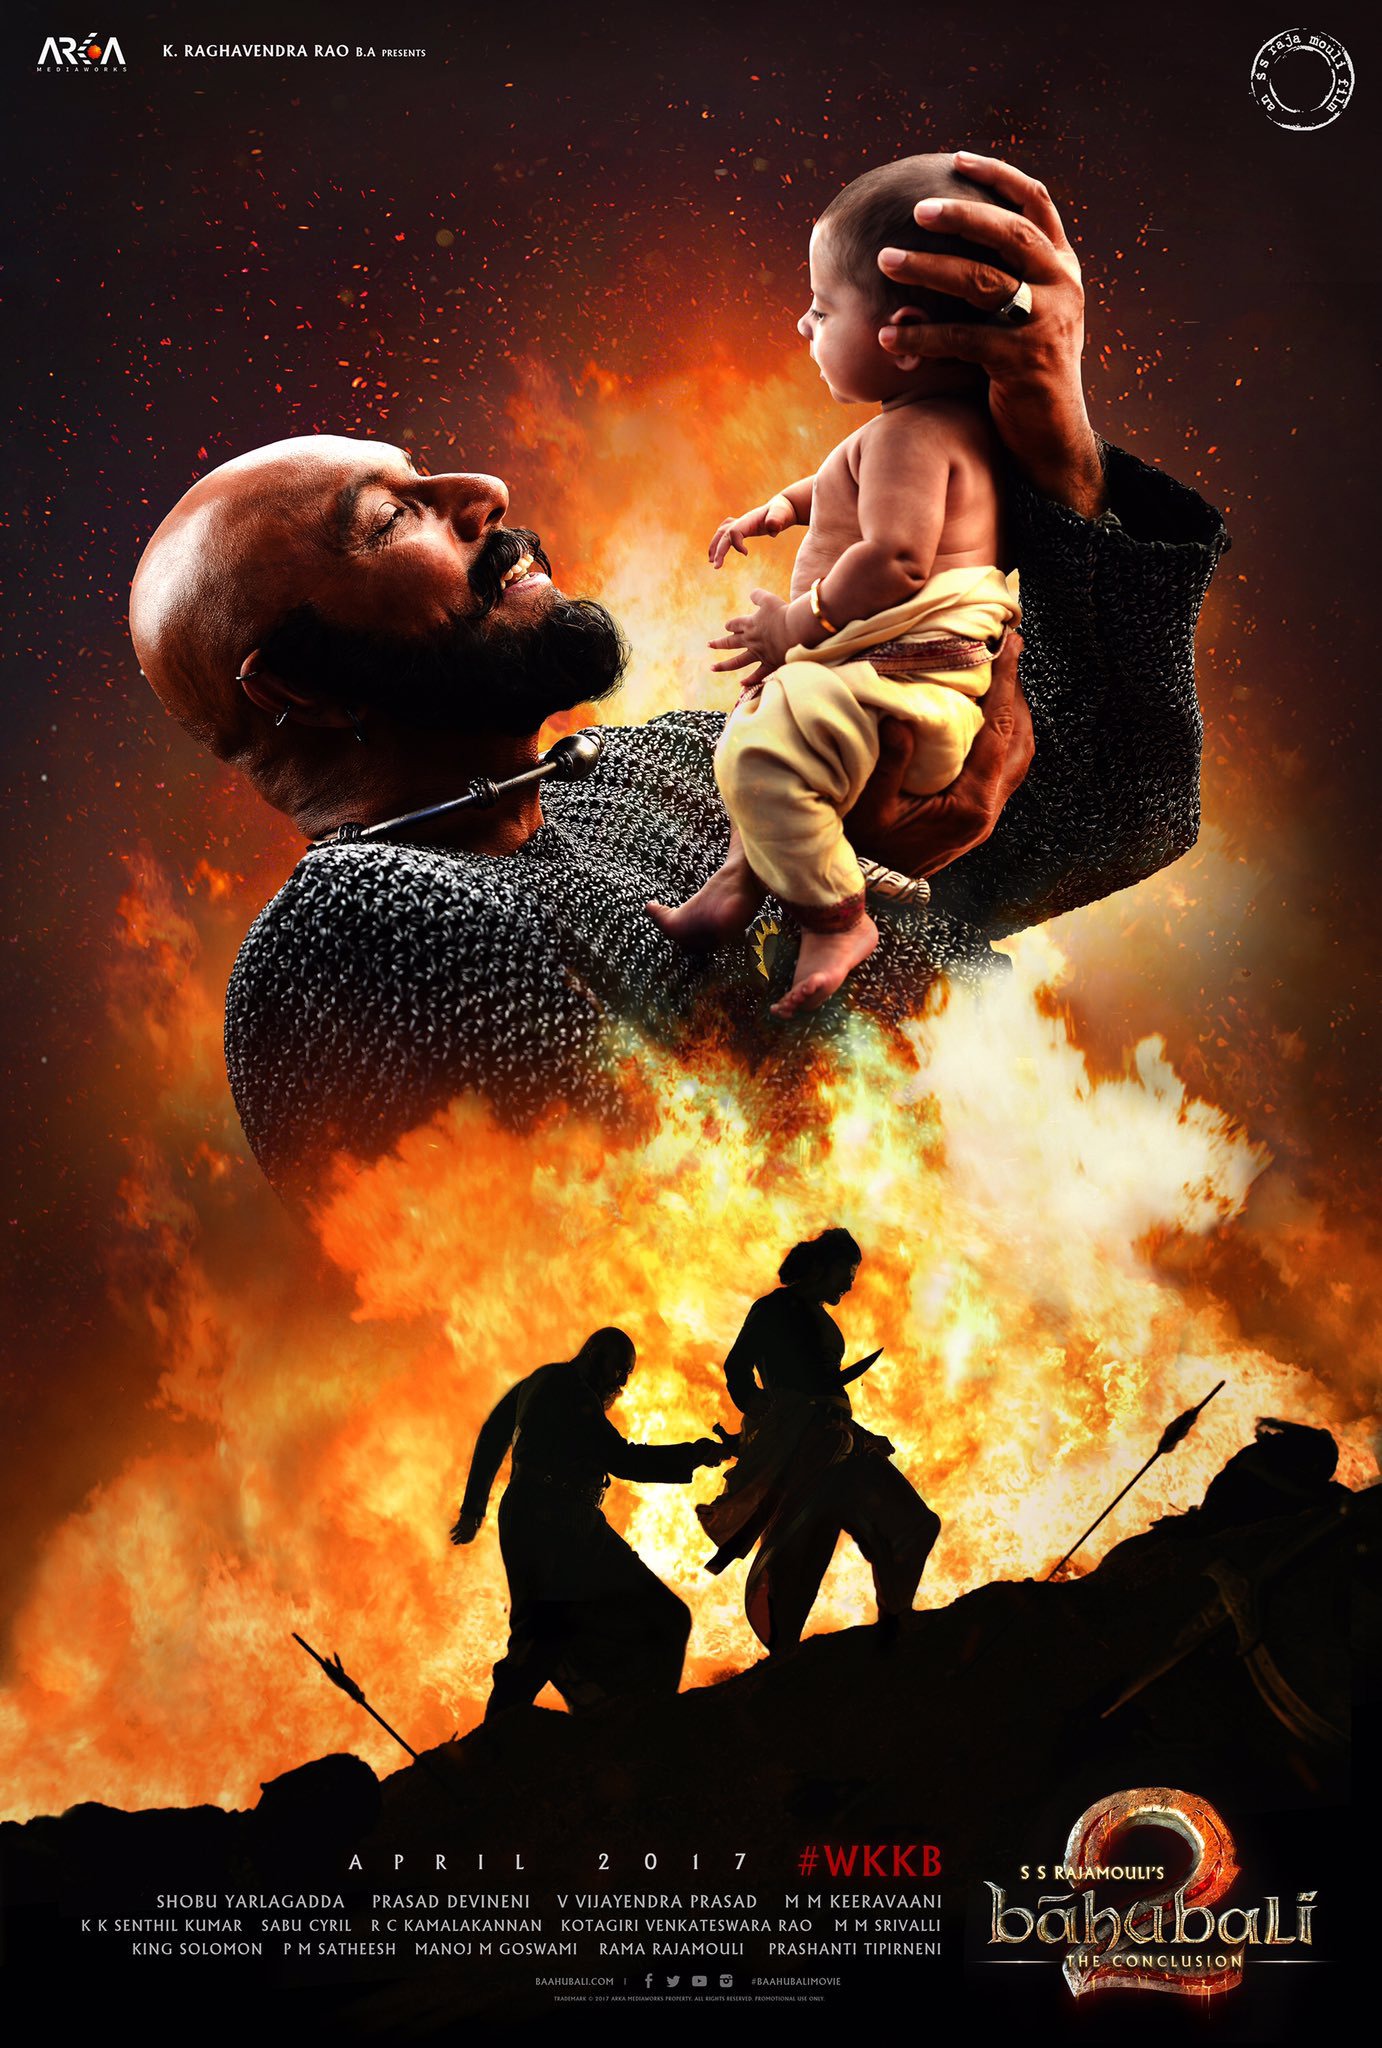 Mega Sized Movie Poster Image for Baahubali 2: The Conclusion (#6 of 12)